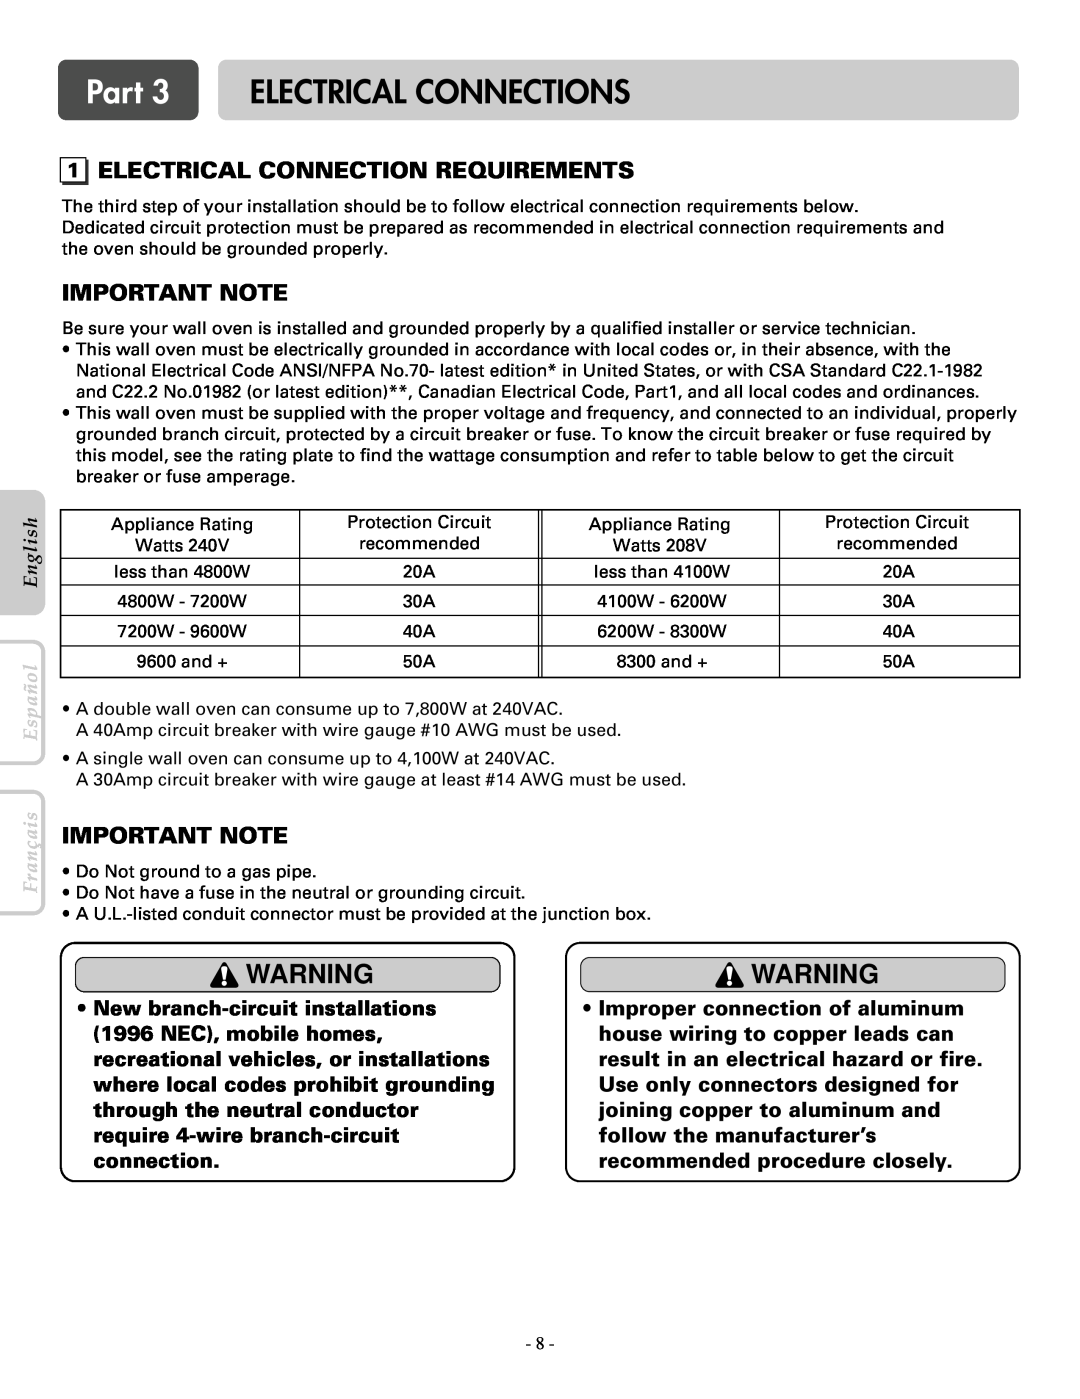 LG Electronics LWS3081ST, LWD3081ST Part 3 ELECTRICAL CONNECTIONS, Electrical Connection Requirements, Important Note 